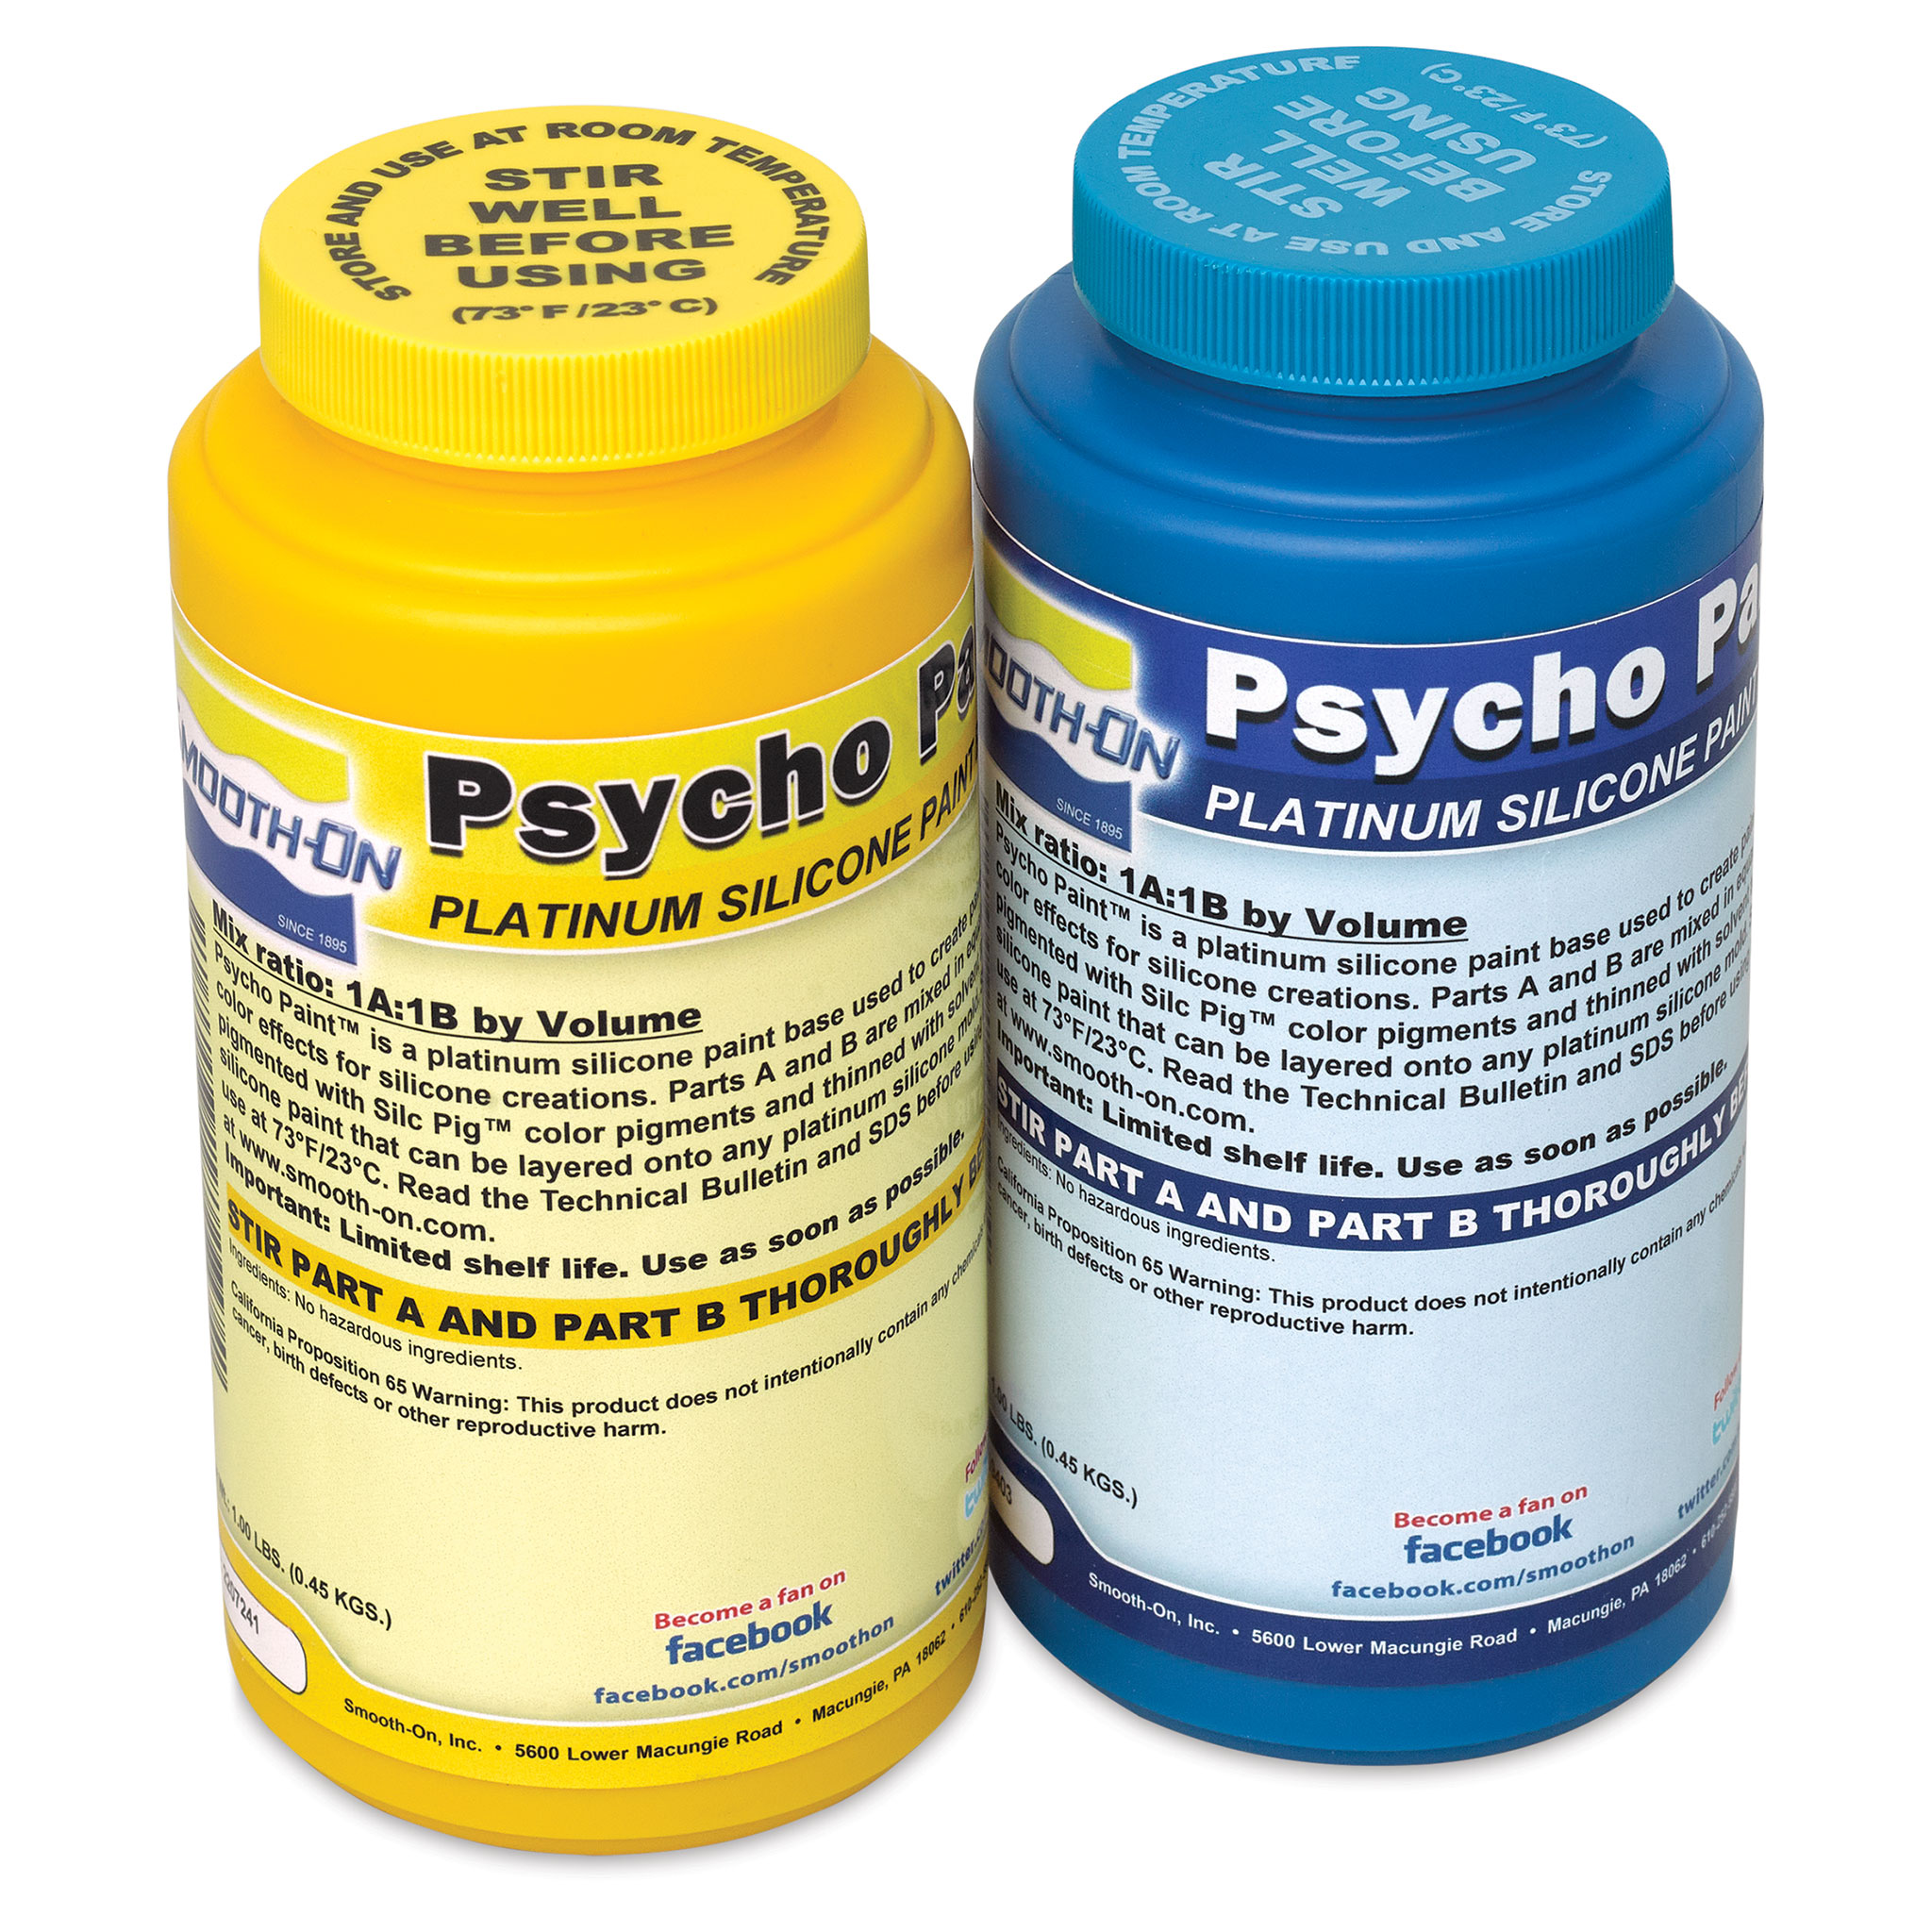 Psycho Paint™ Product Information